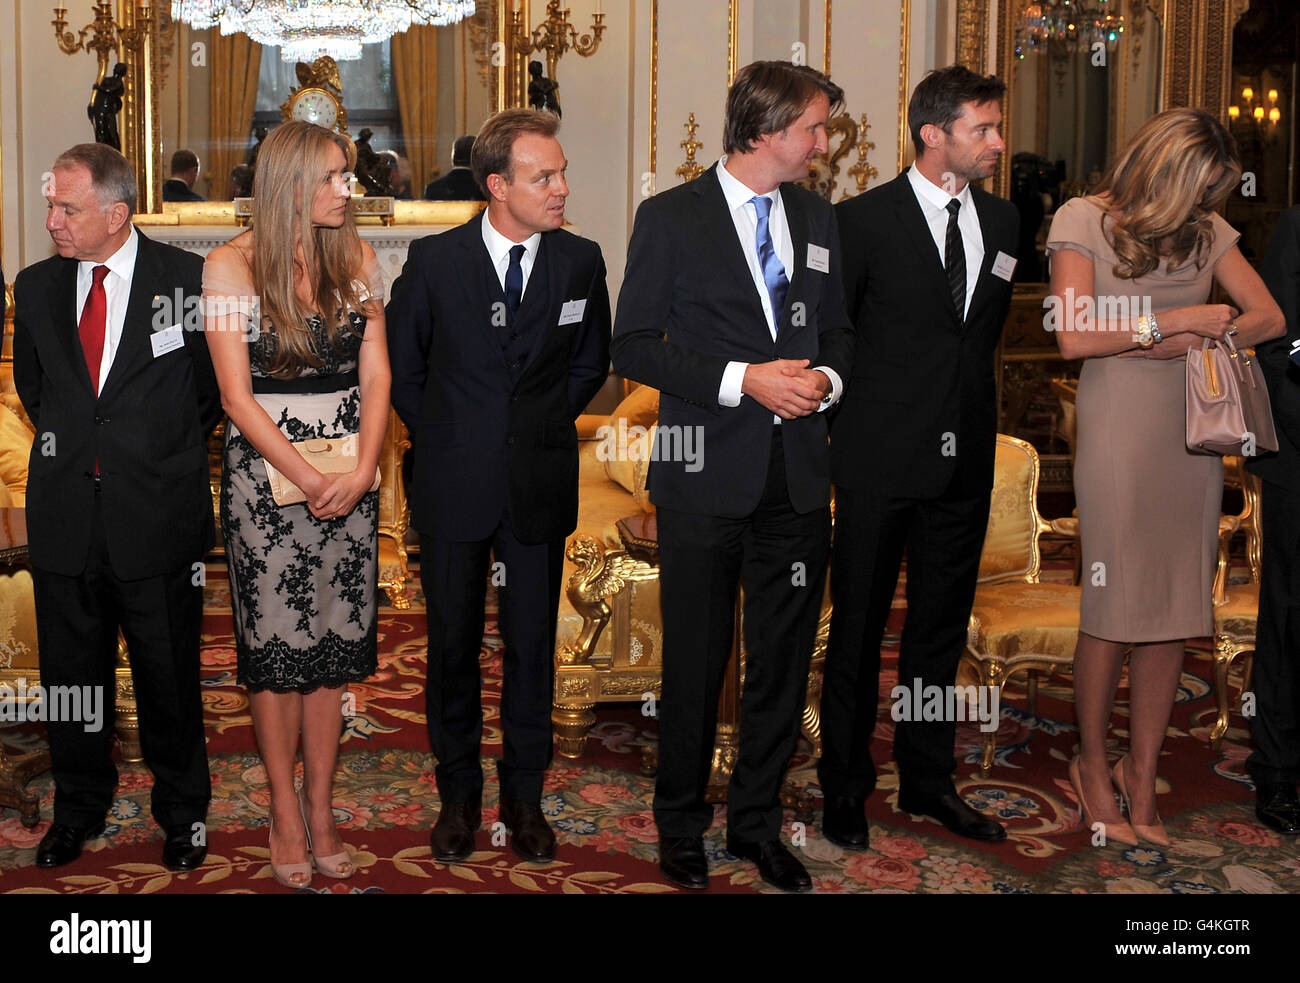 L-R: Australian High Commissioner John Dauth, Fashion designer Collette Dinnigan, Actor and singer Jason Donovan, director Tom Hooper, actor Hugh Jackman, model Elle Macpherson in the white drawing room at Buckingham Palace, before a Royal reception for members of the Australian community living in the UK. Stock Photo